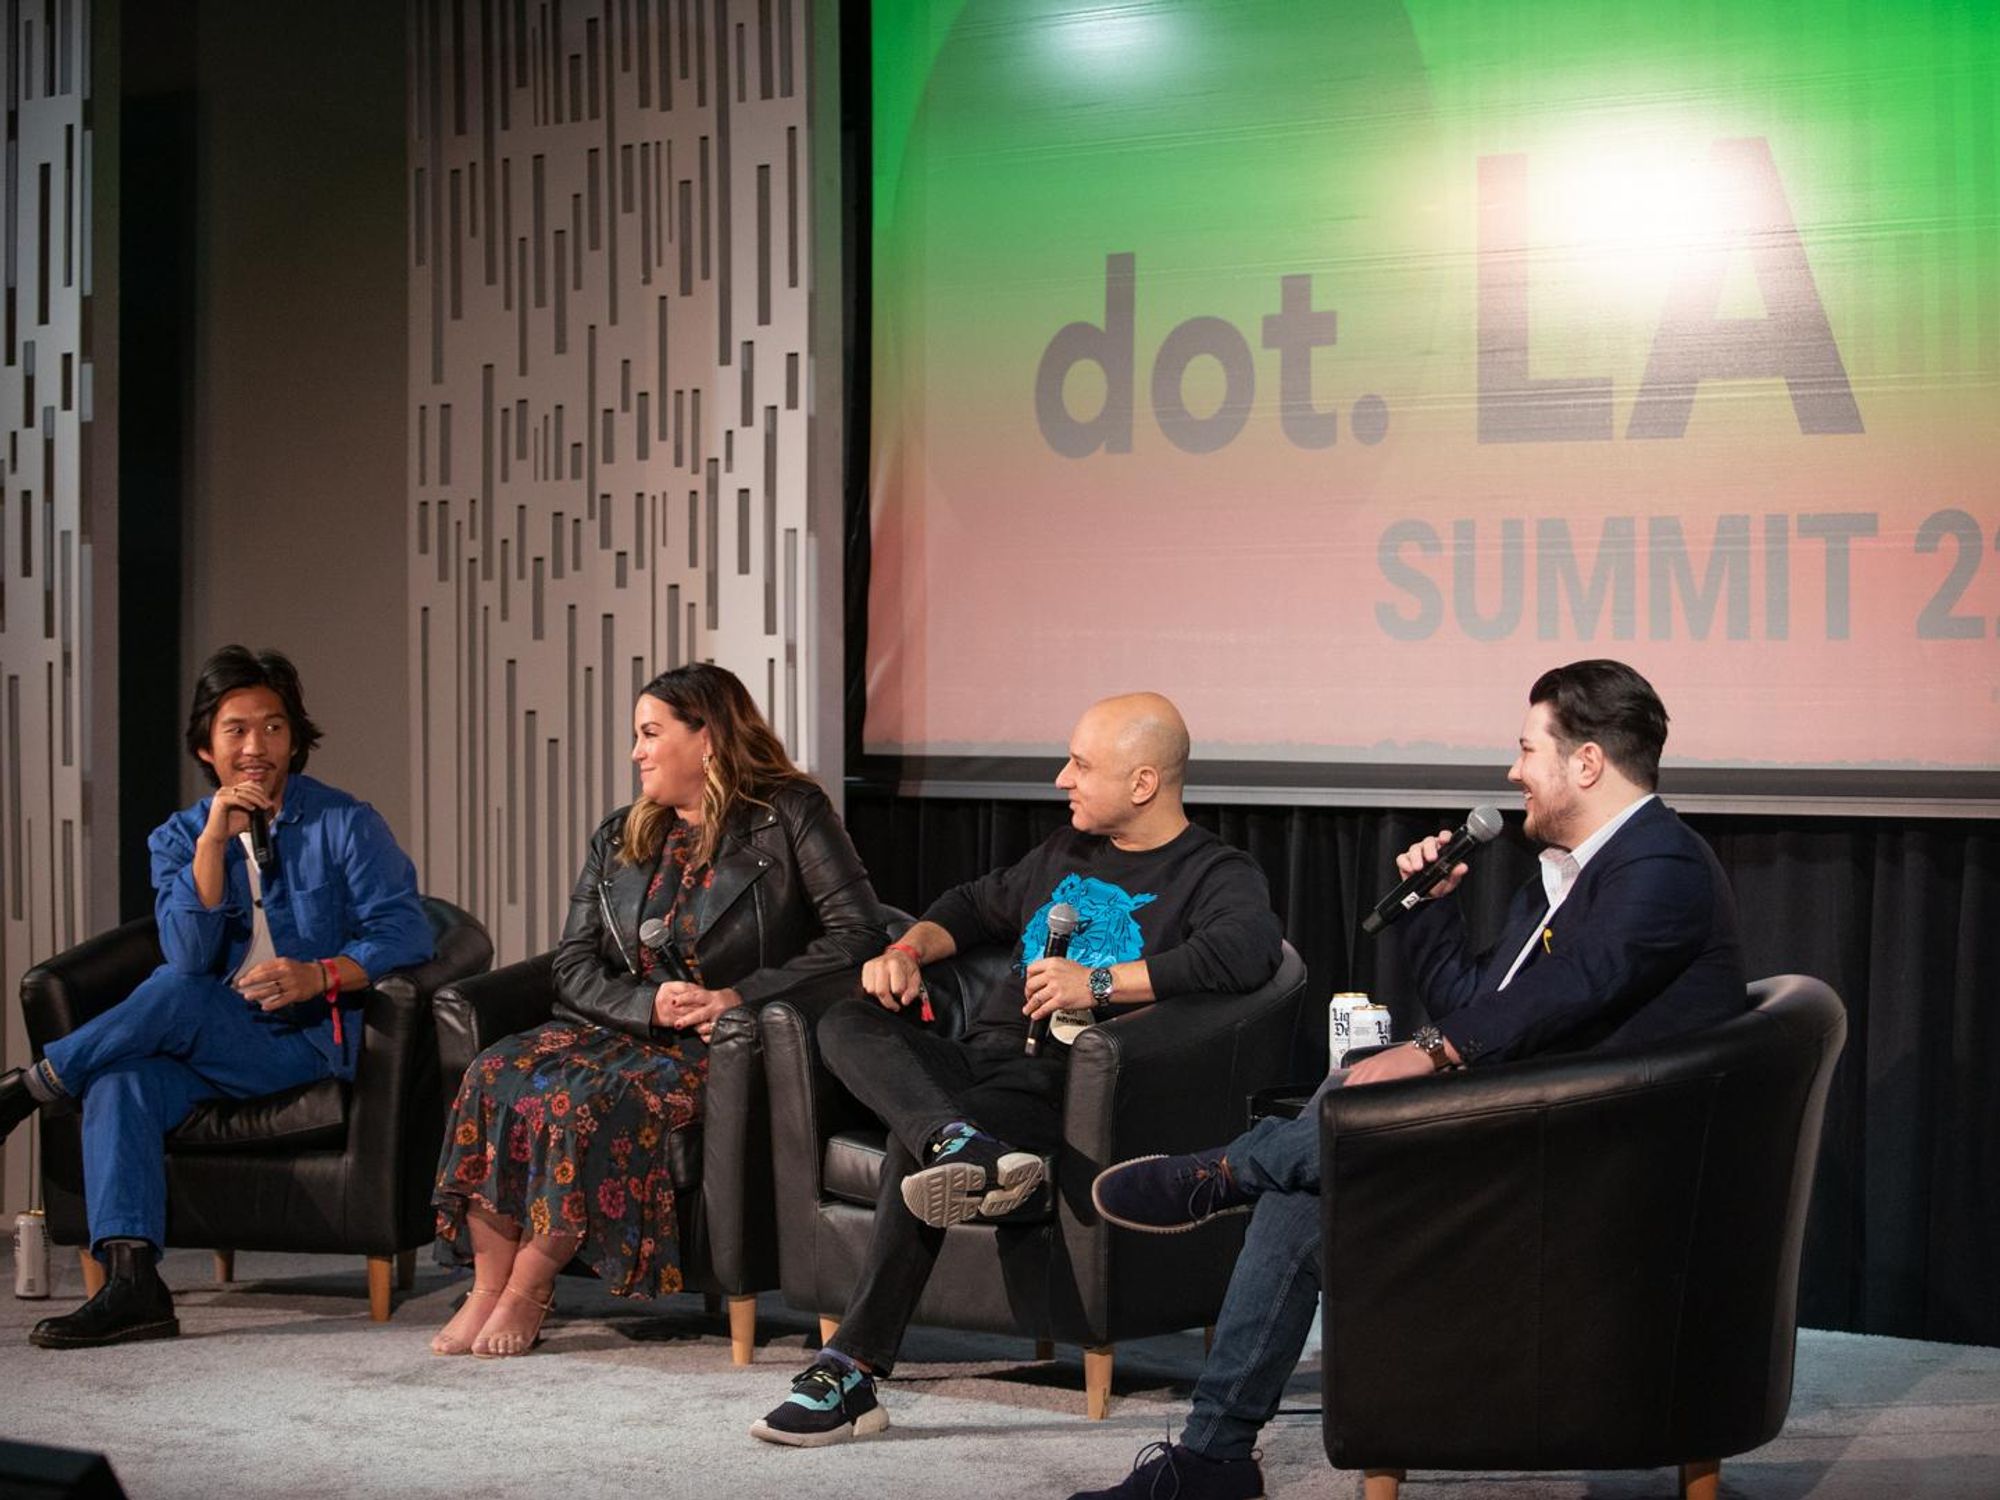 dot.LA Summit: How Companies Can Build a 'Relatable' Metaverse